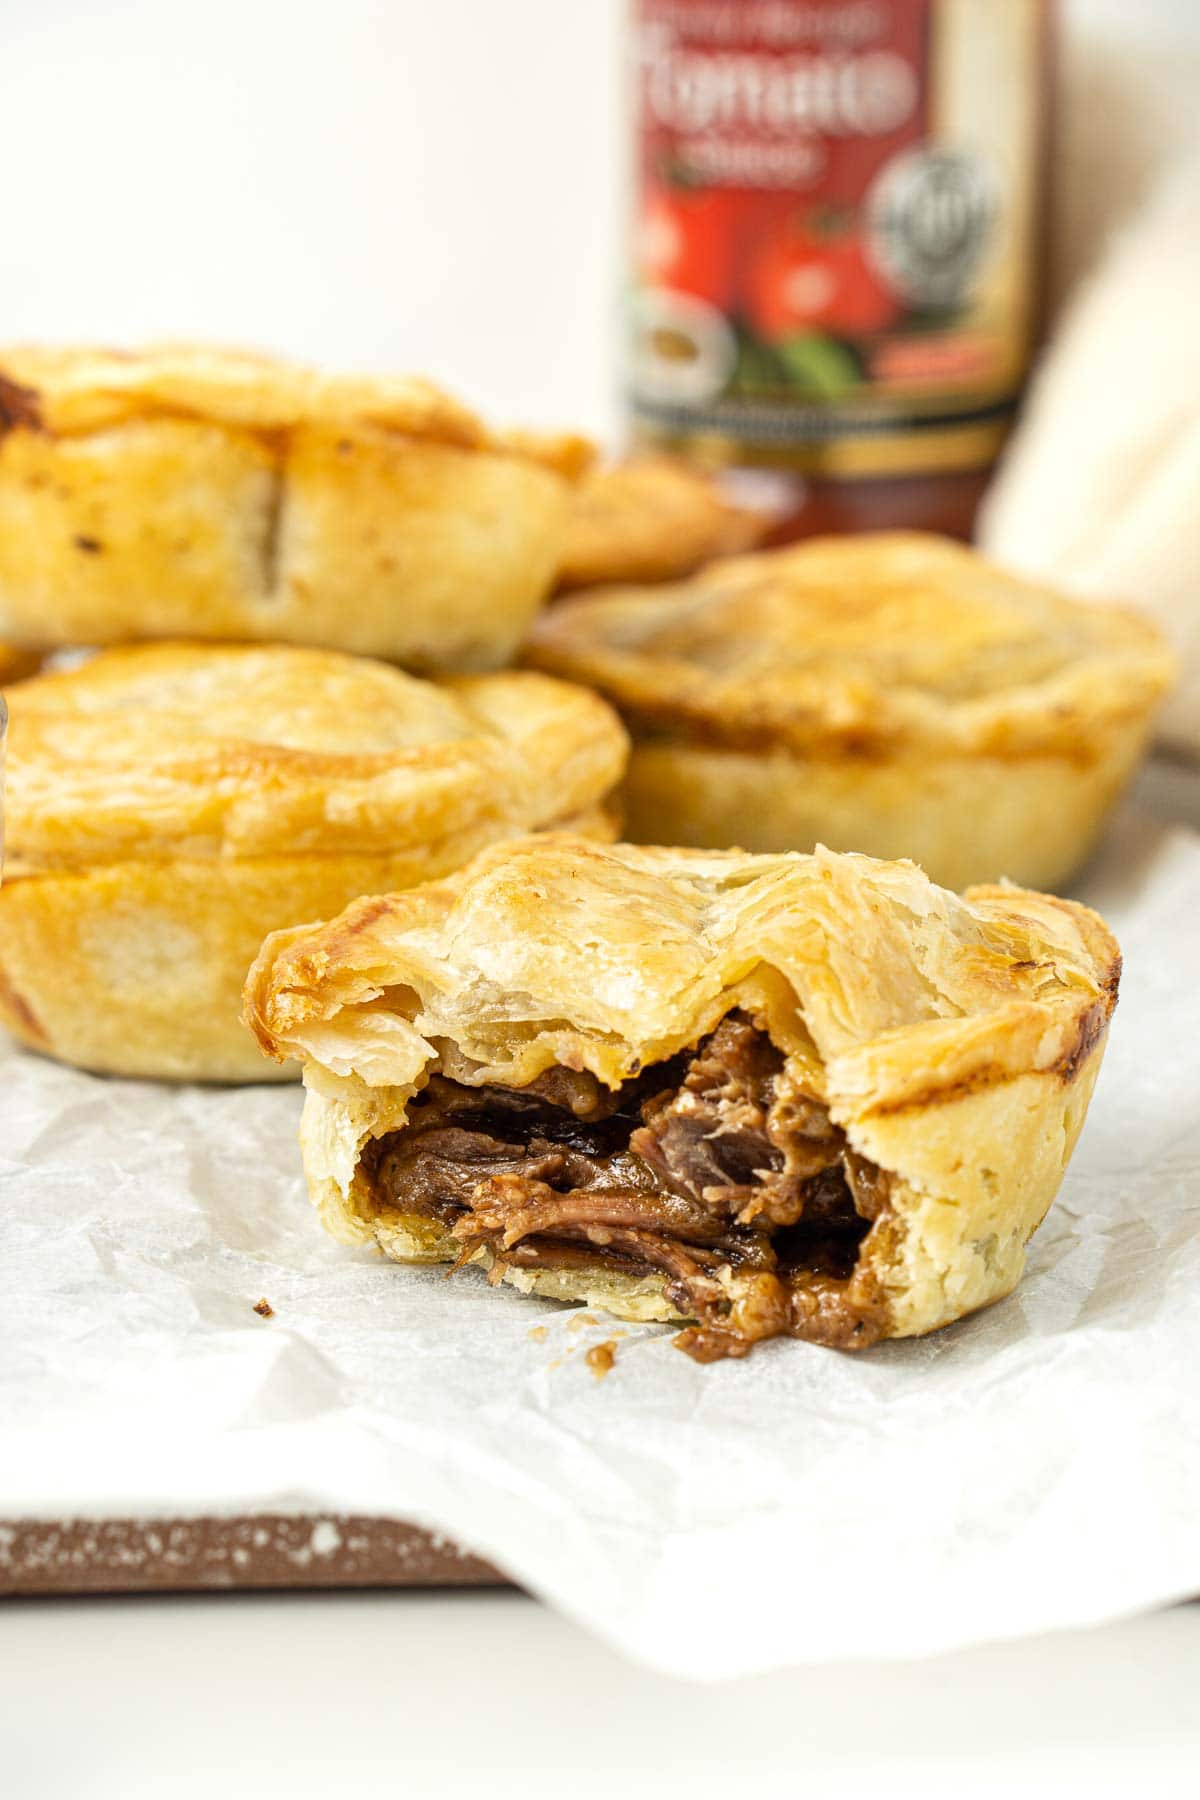 Minced Beef and Onion Pie - Little Sugar Snaps